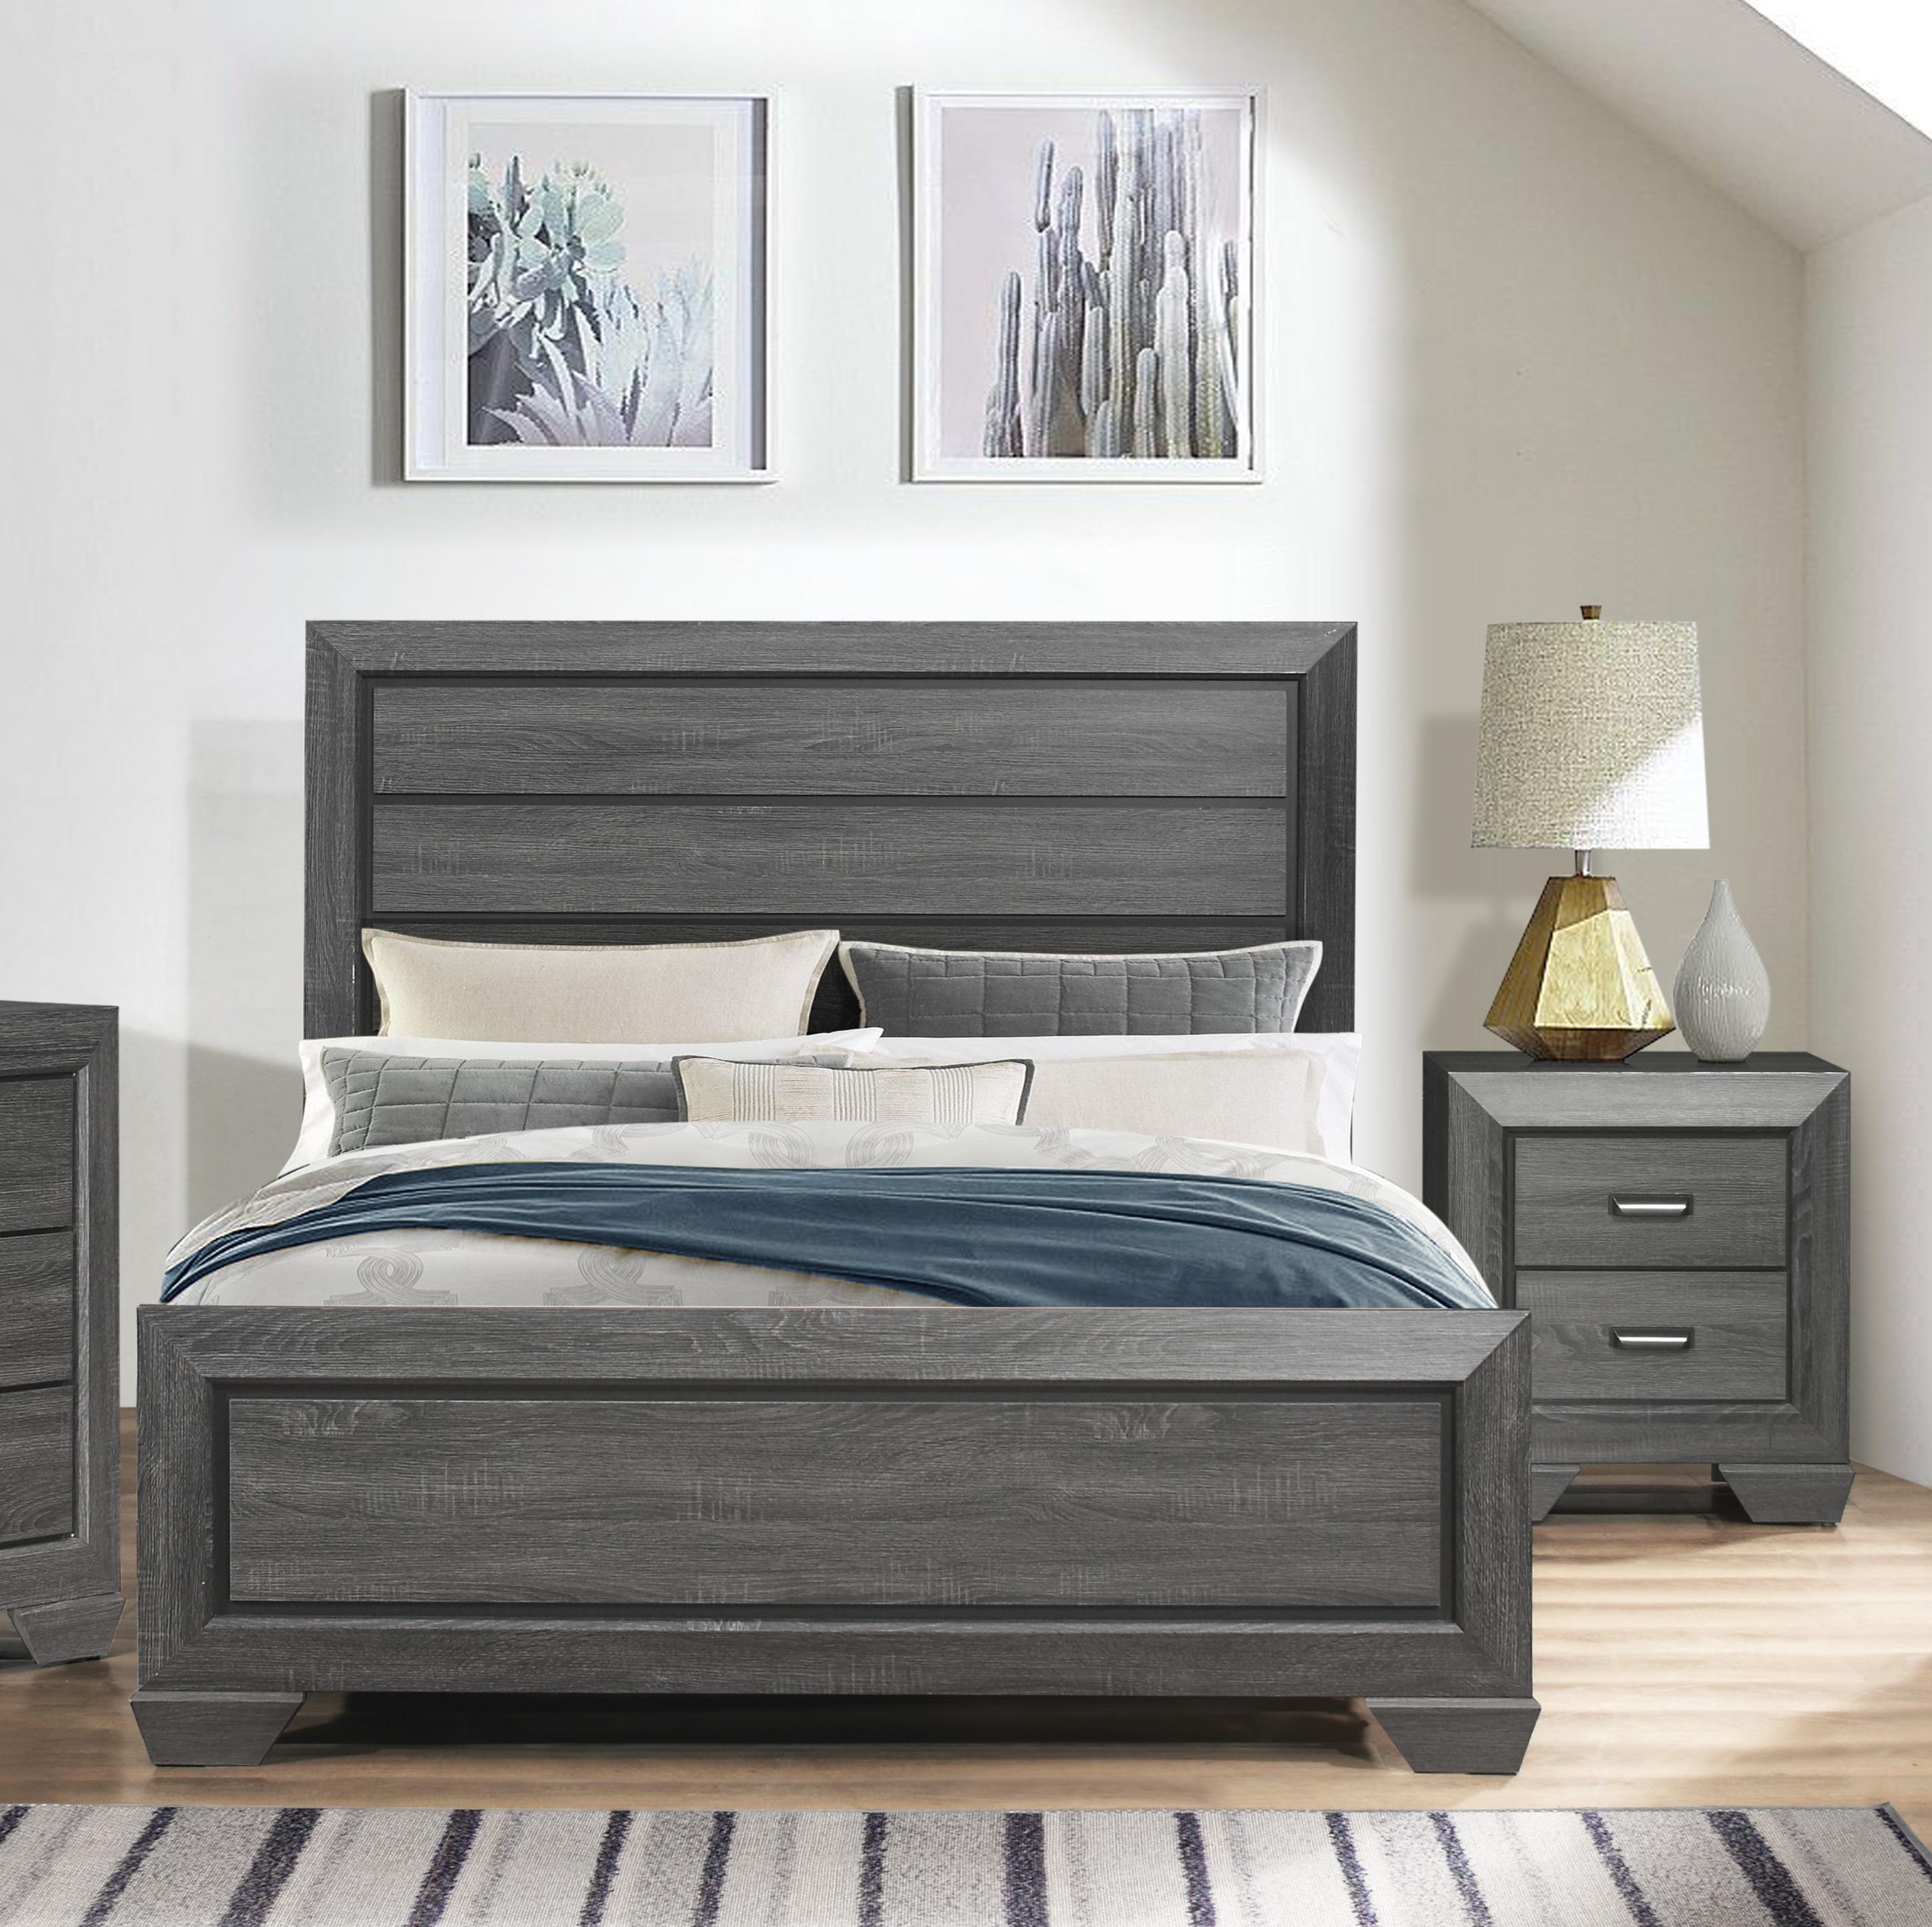 Rustic Bedroom Set 1904GY-1-3PC Beechnut 1904GY-1-3PC in Gray 